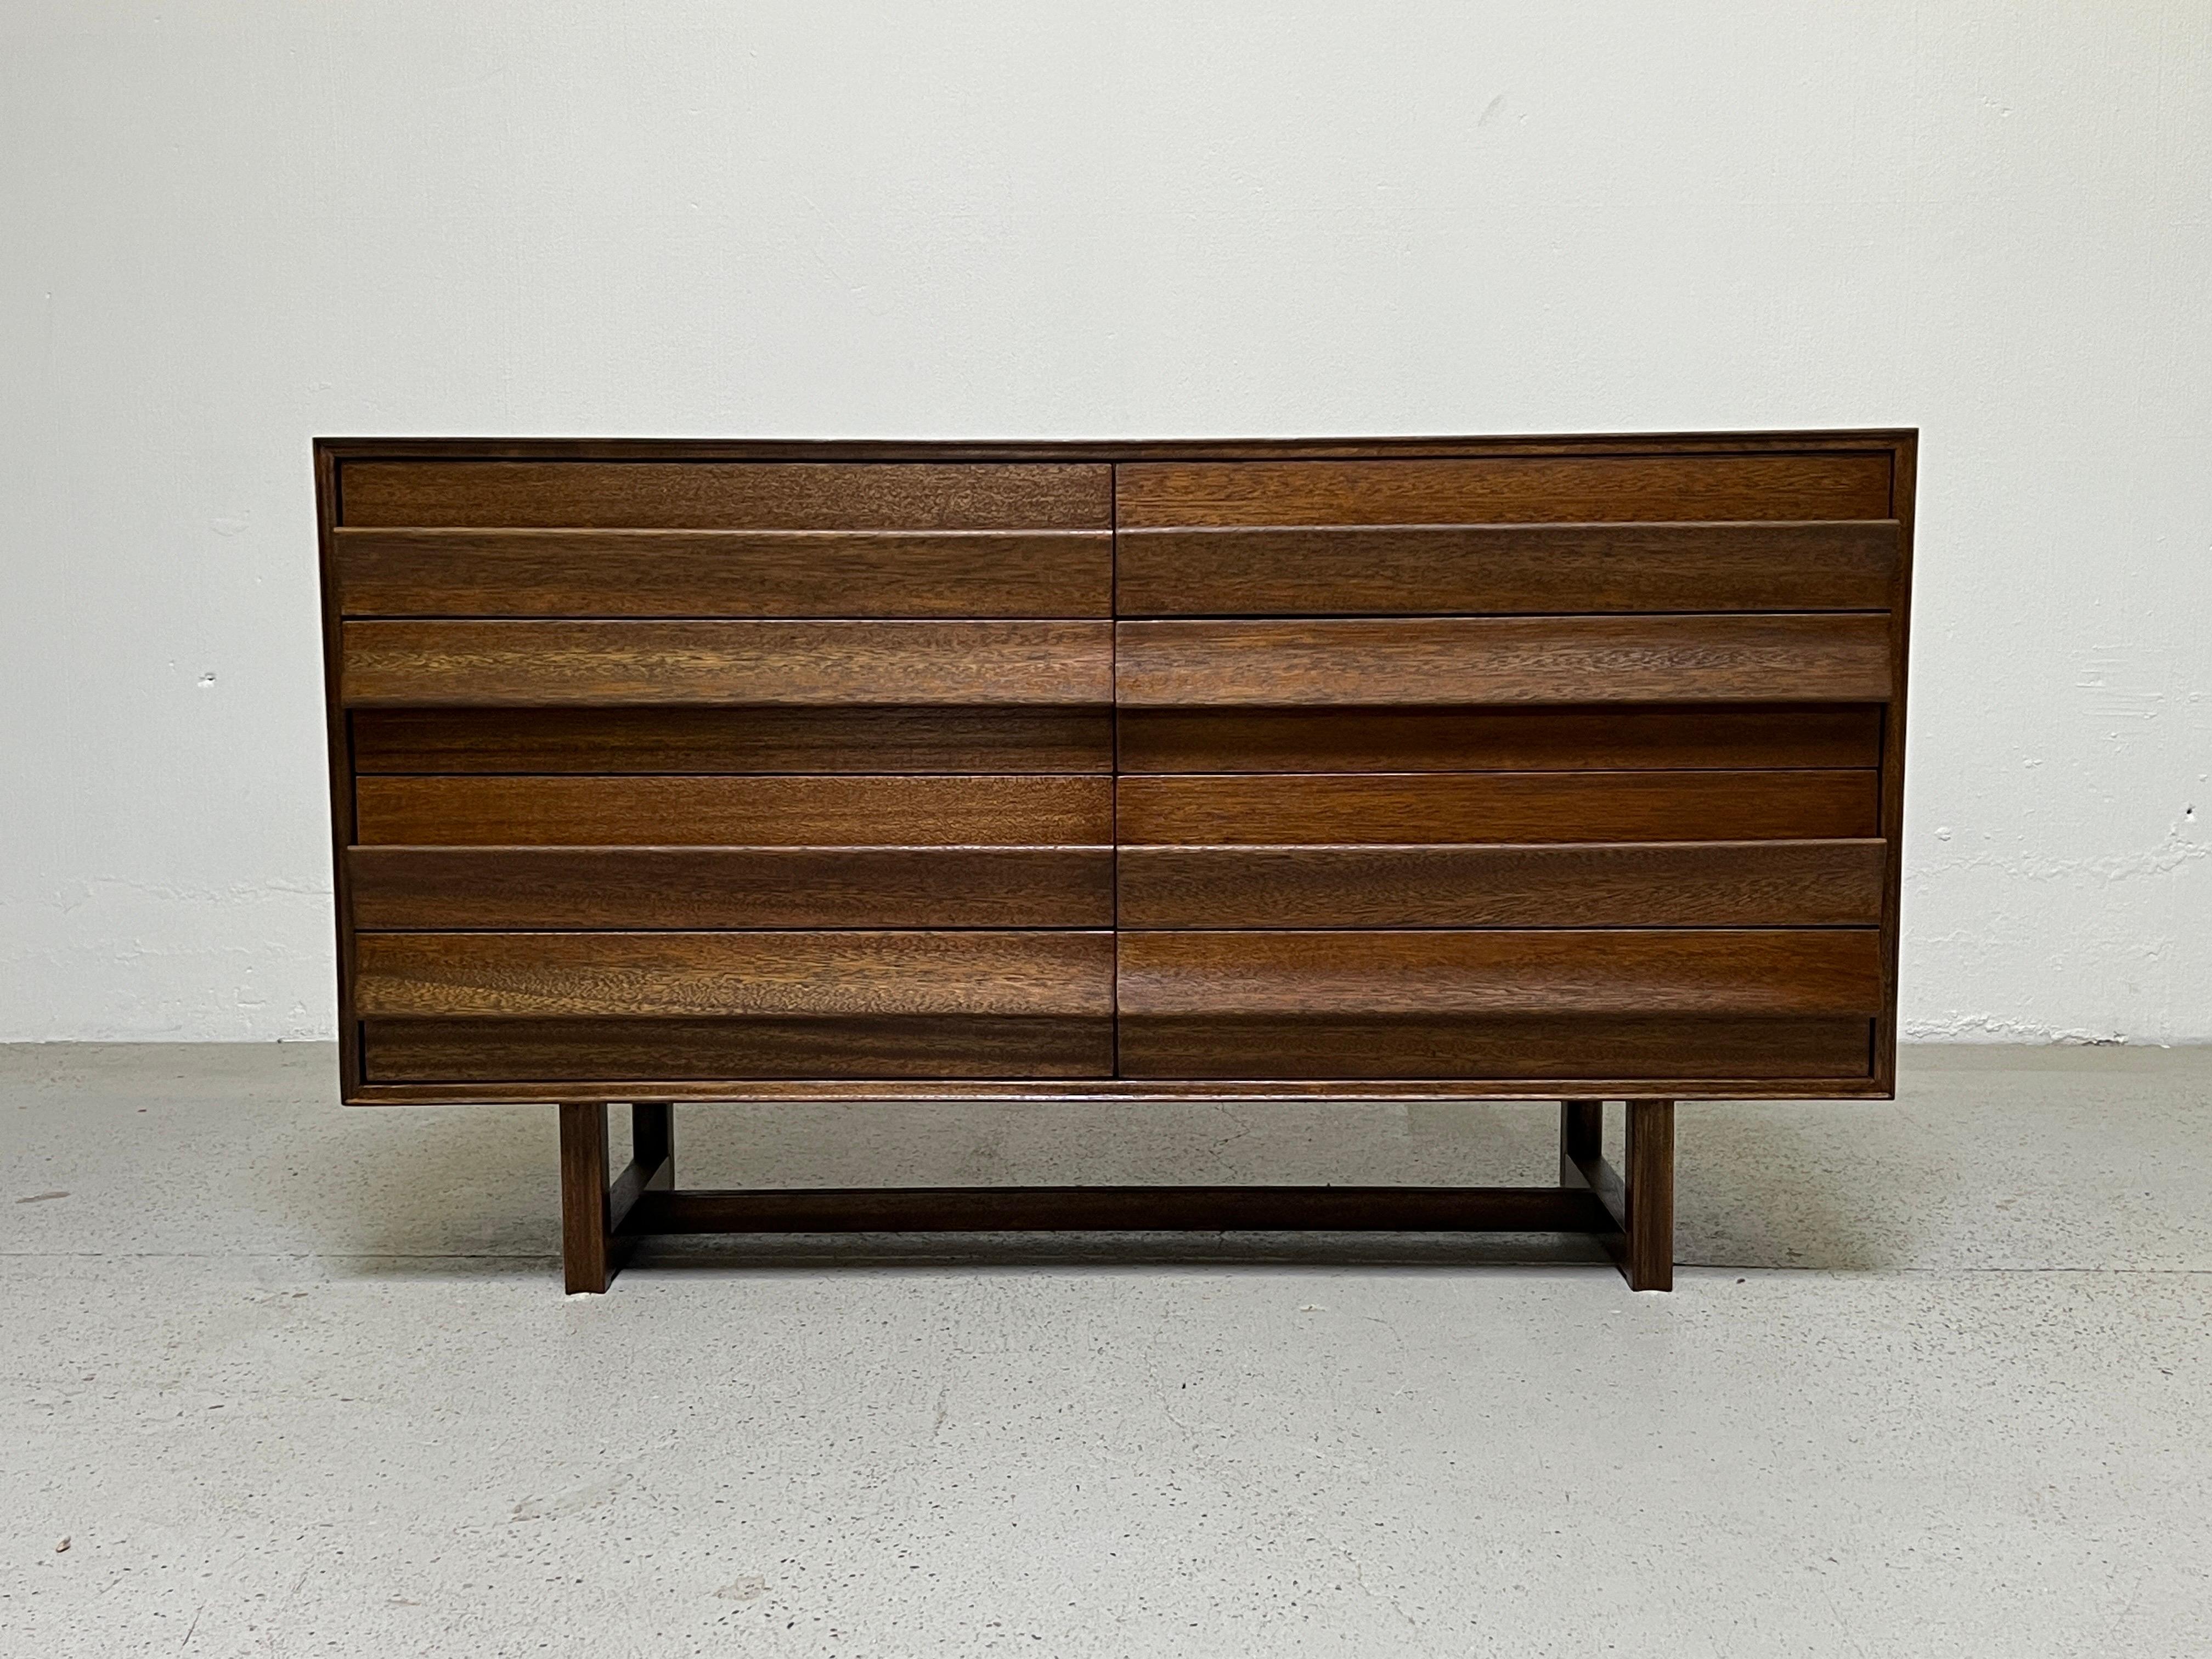 A mahogany chest of drawers designed by Paul Laszlo for brown saltman.